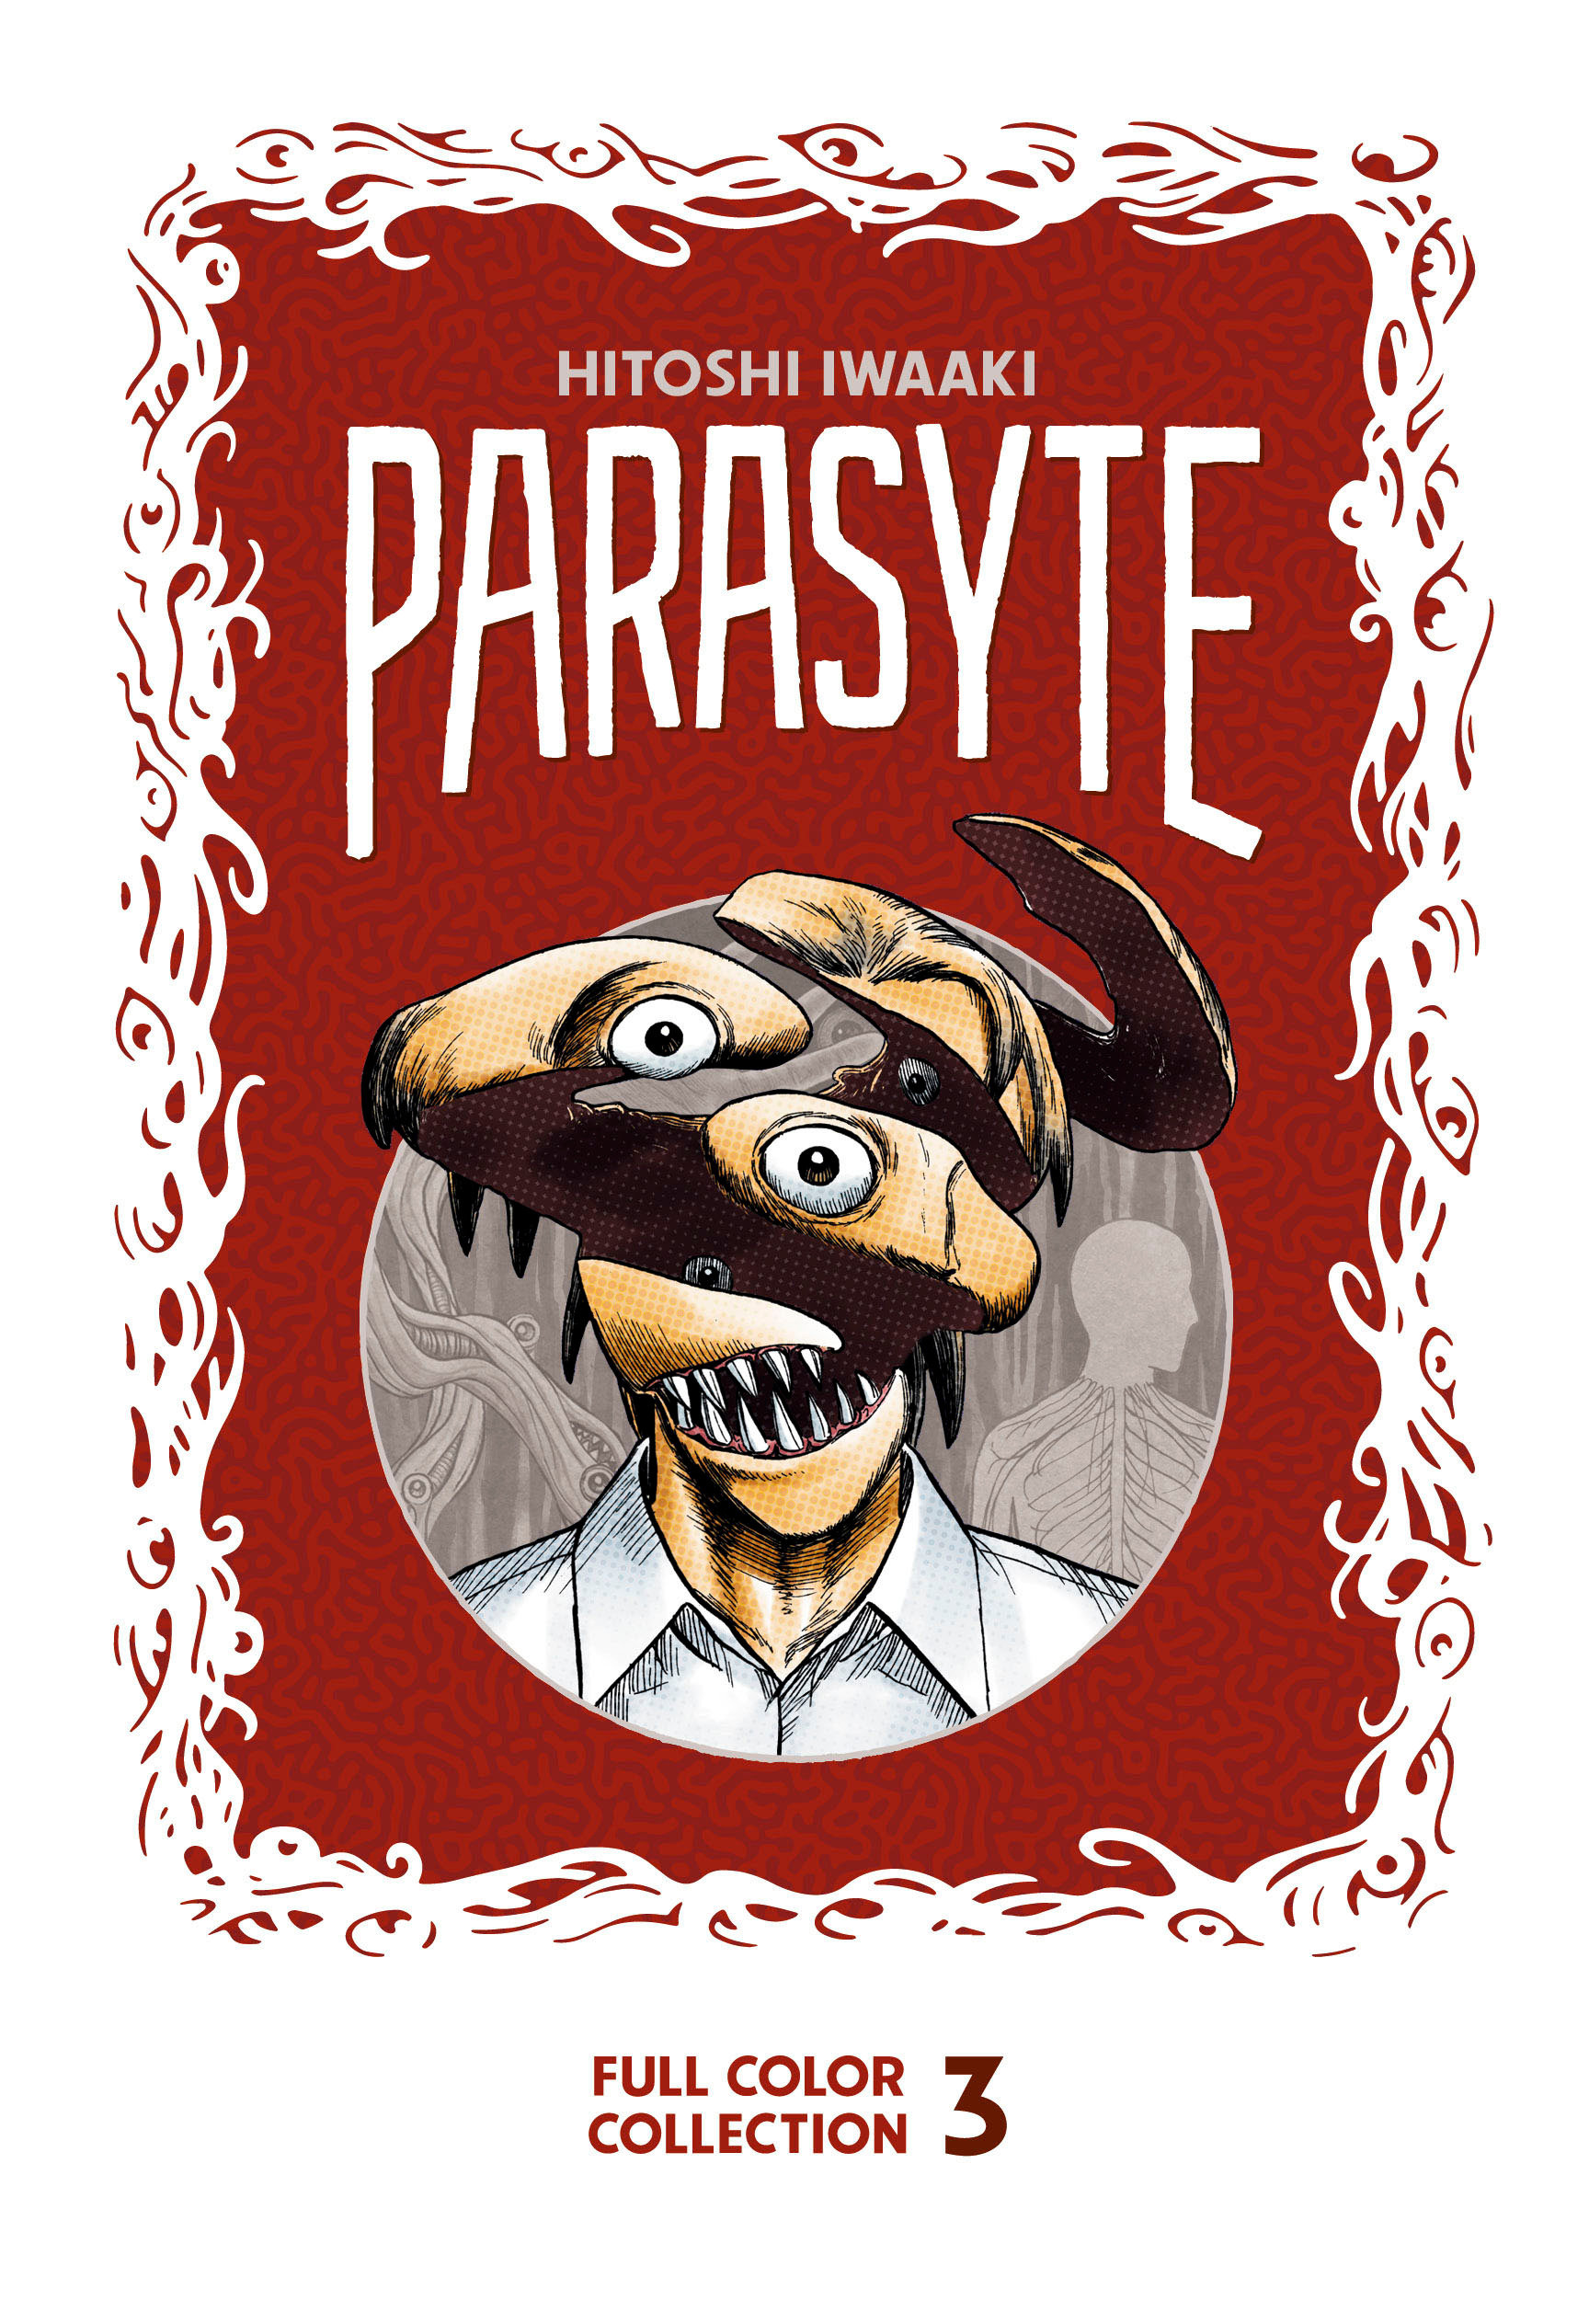 Parasyte Full Color Collection Manga Hardcover 3 (Mature)